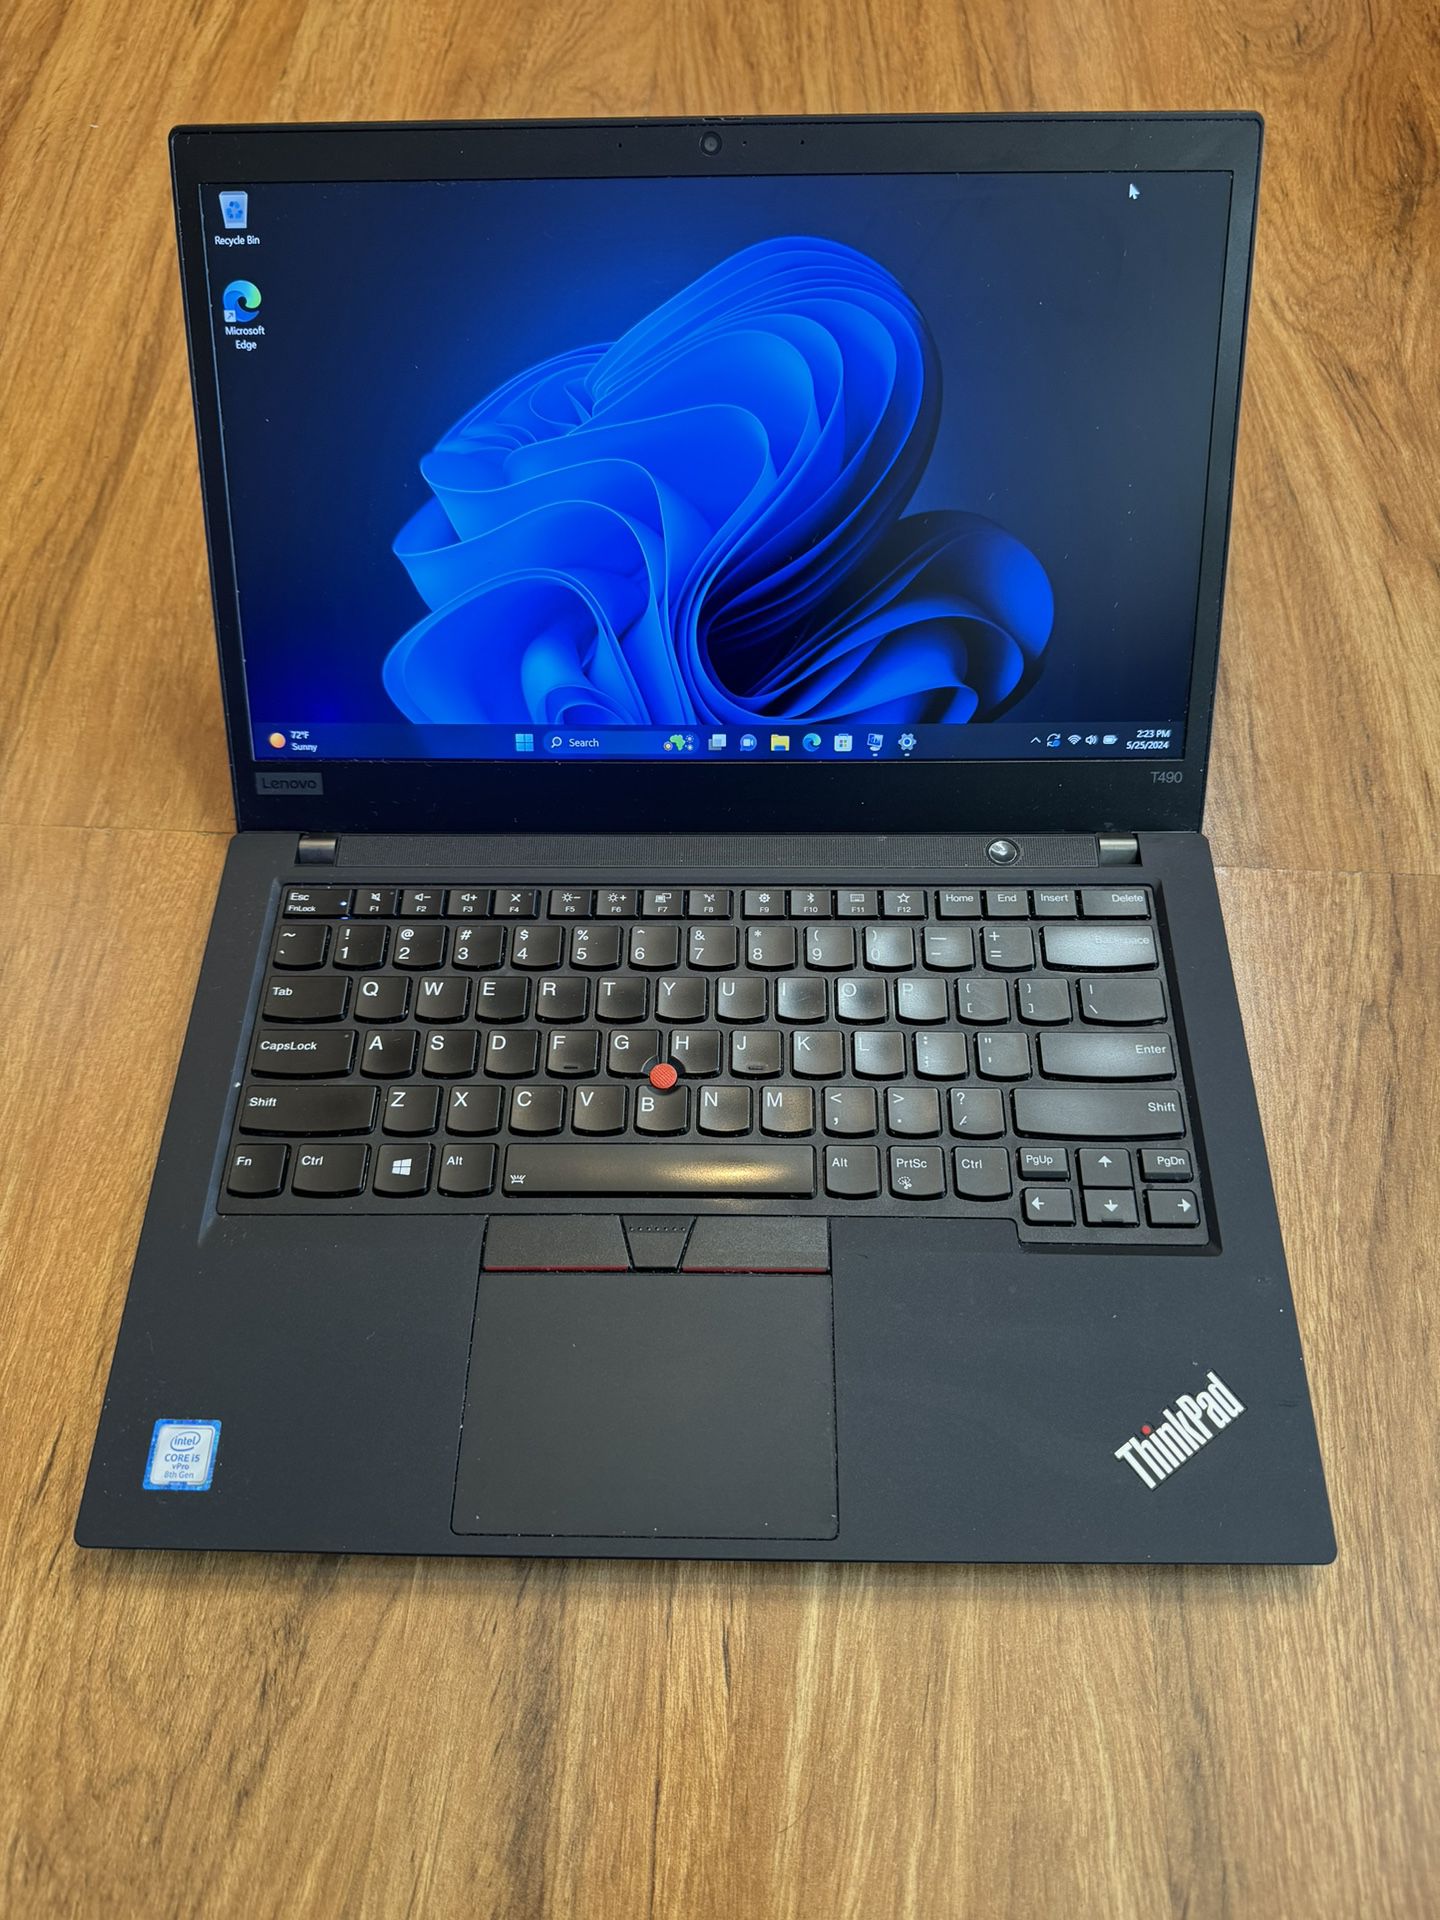 Lenovo ThinkPad T490 core i5 8th gen 16GB Ram 256GB SSD Windows 11 Pro 14” UHD Screen Laptop with charger in Excellent Working condition!!!!!  Specifi